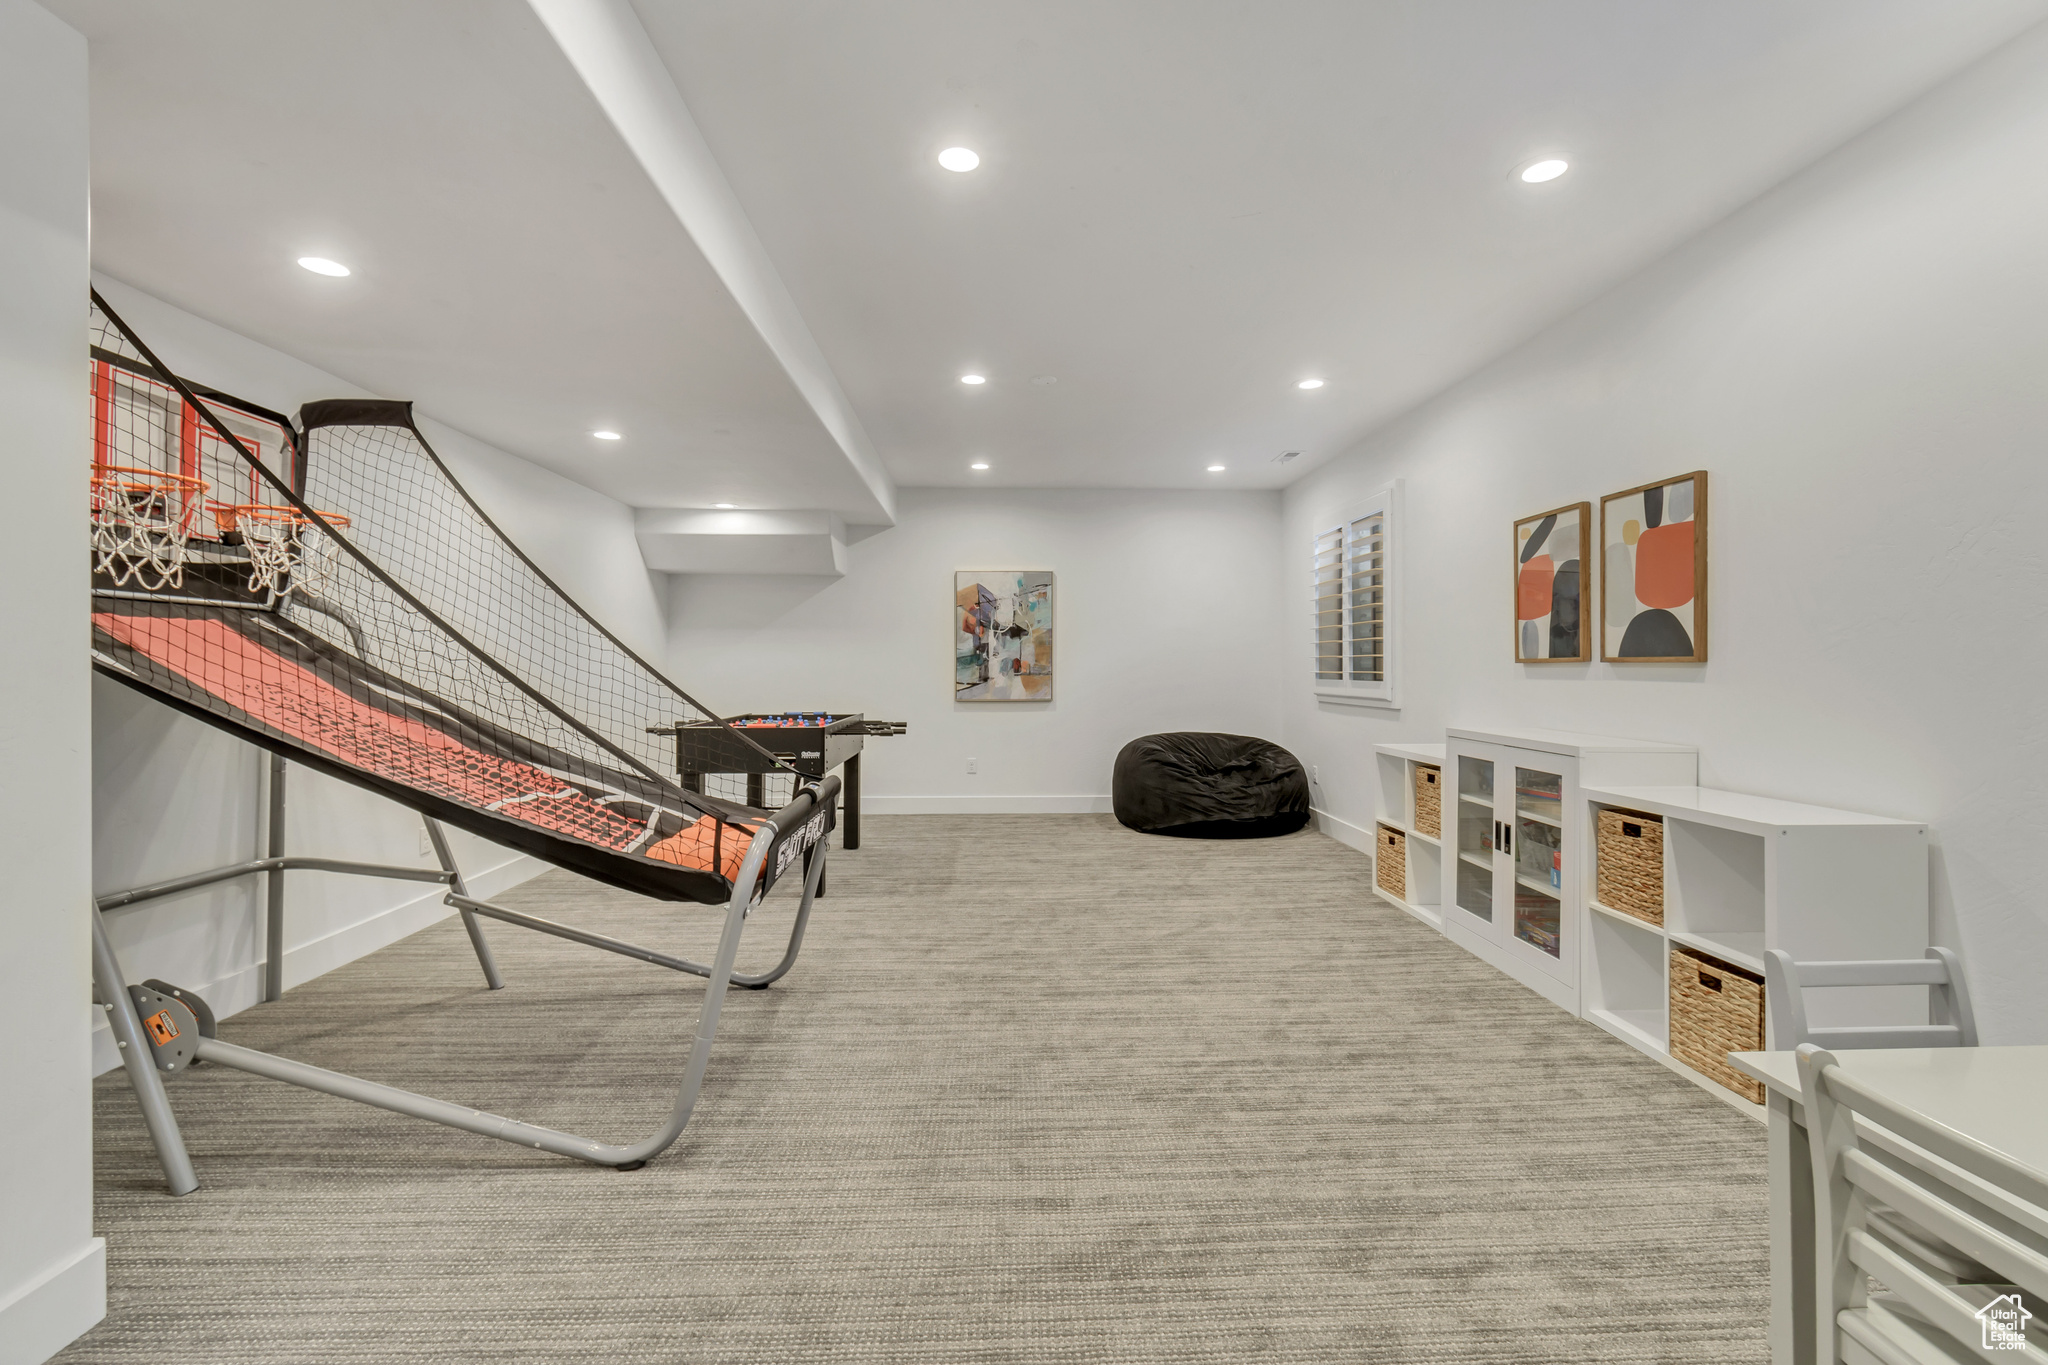 Workout area with light colored carpet